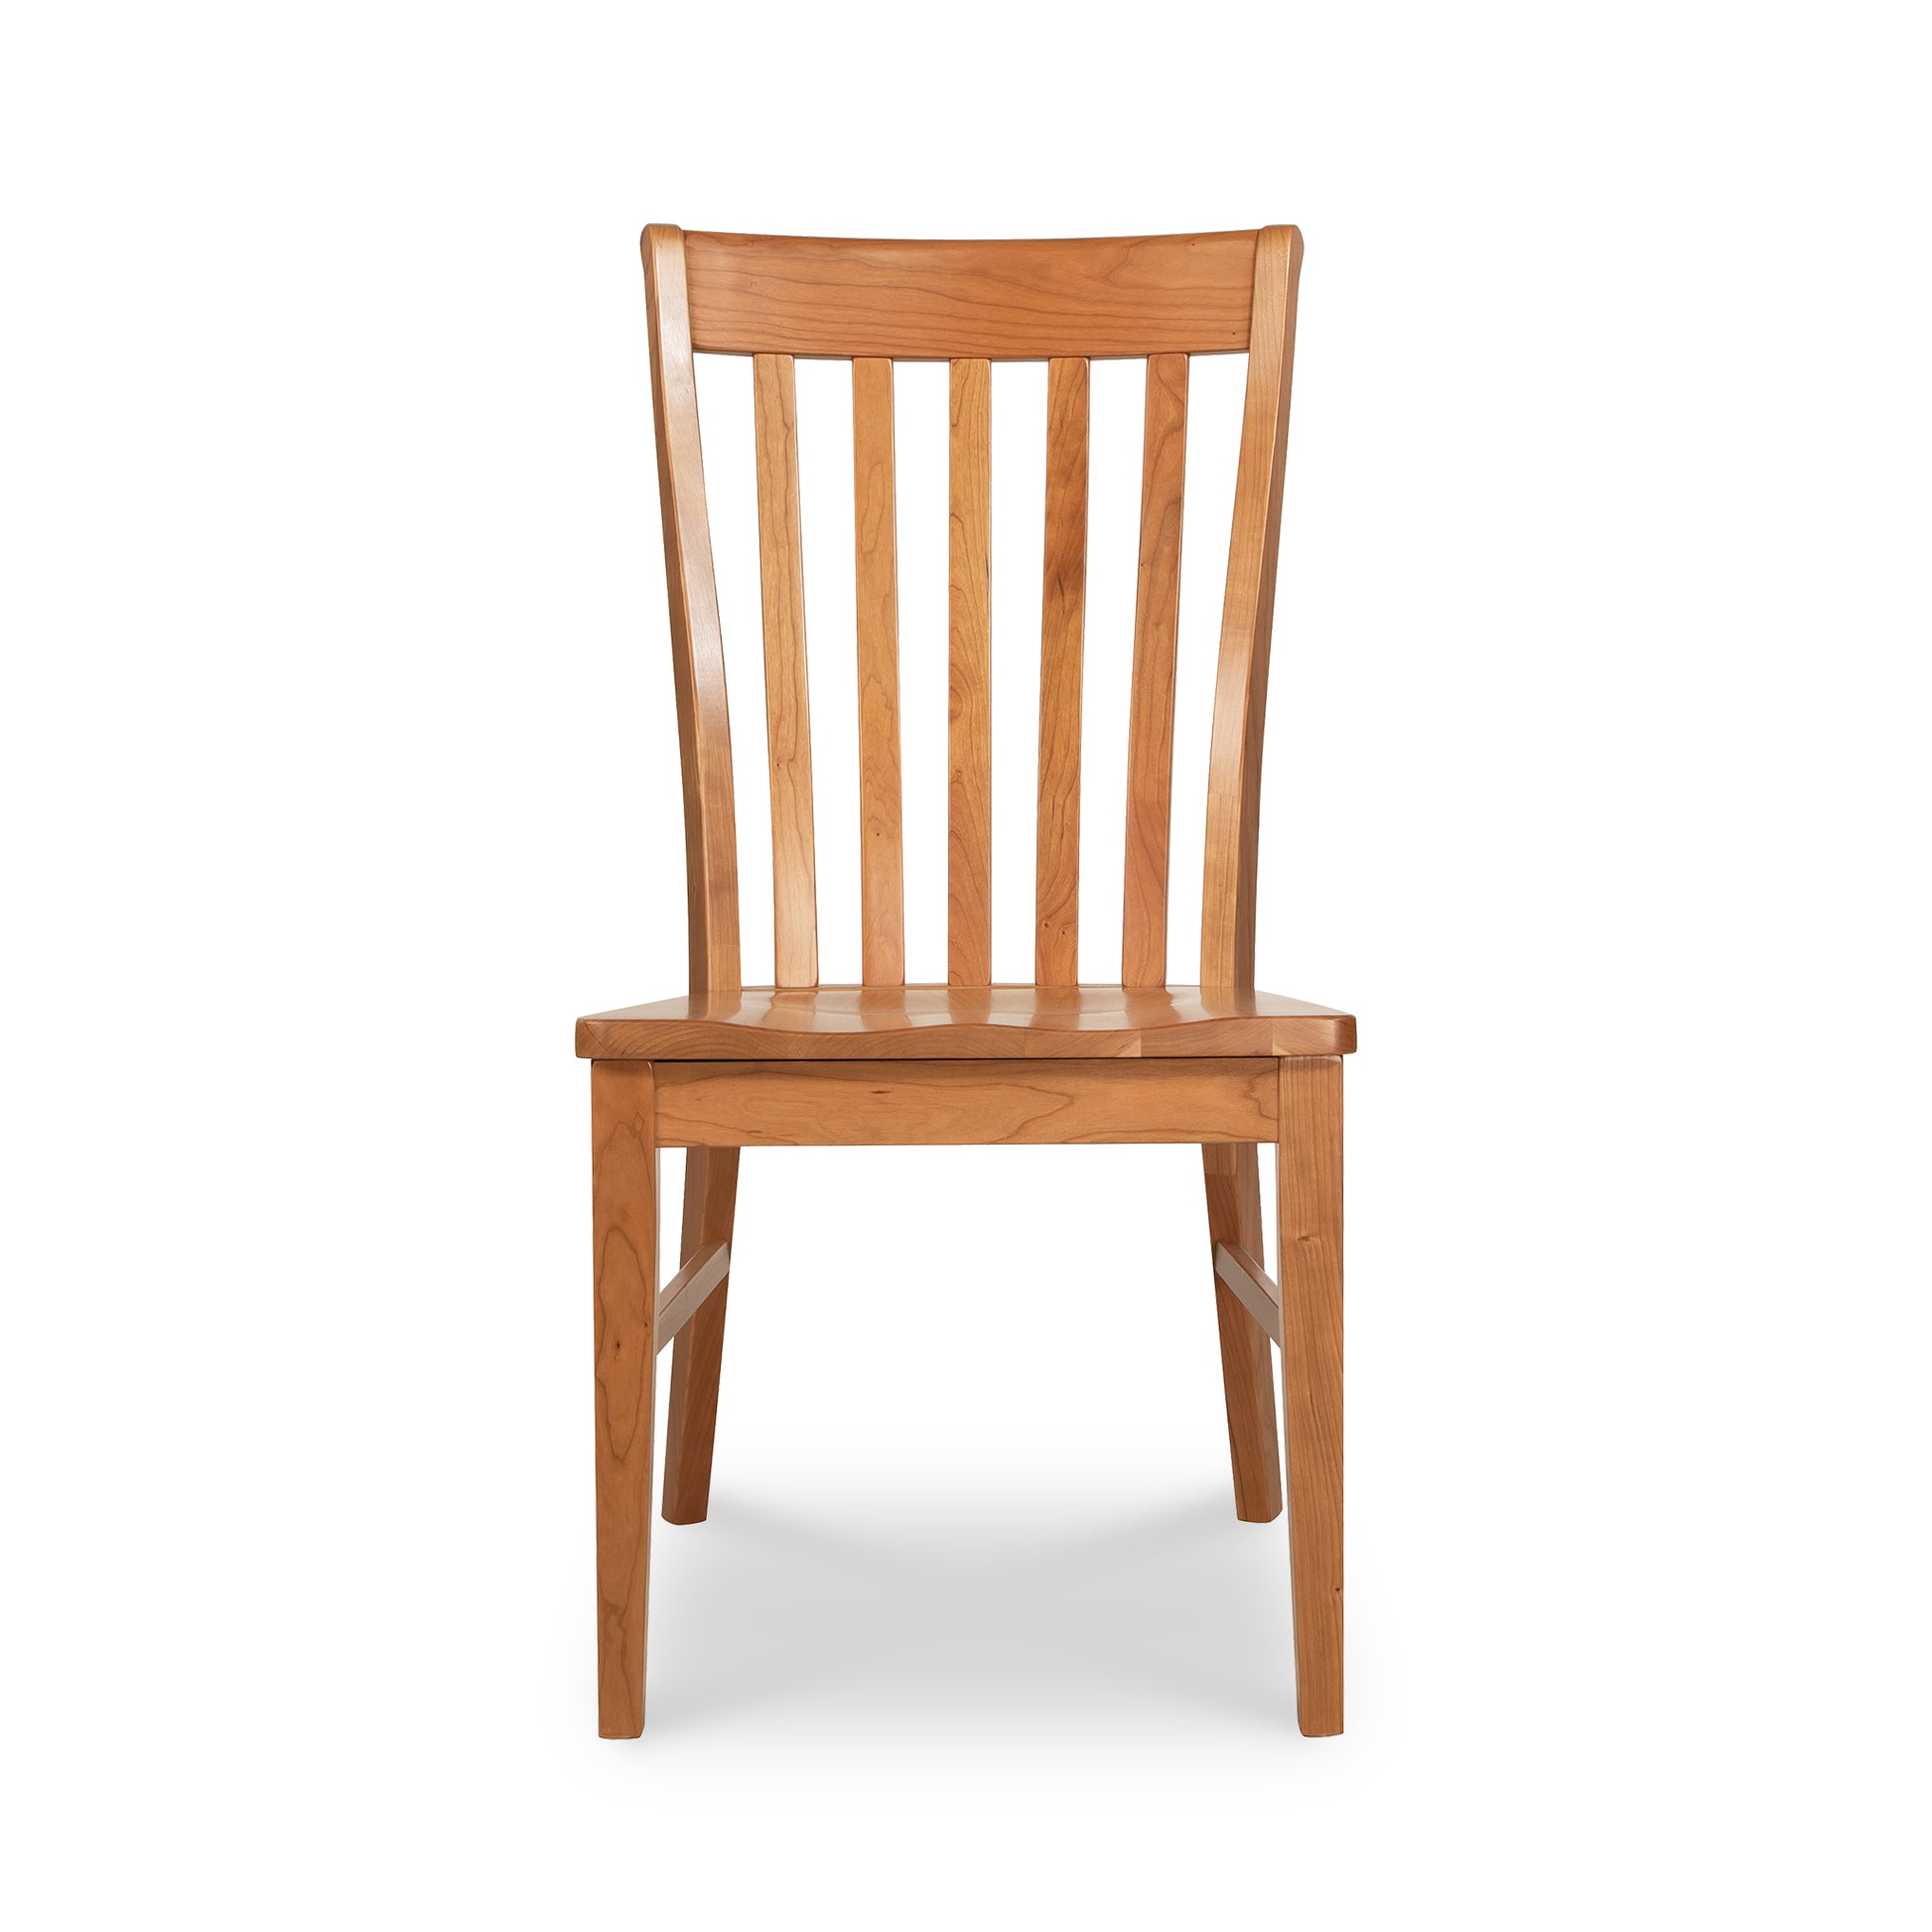 A Country Shaker Chair with Wood Seat from Vermont Woods Studios, featuring a high, slatted backrest and an ergonomic seat, isolated on a white background.